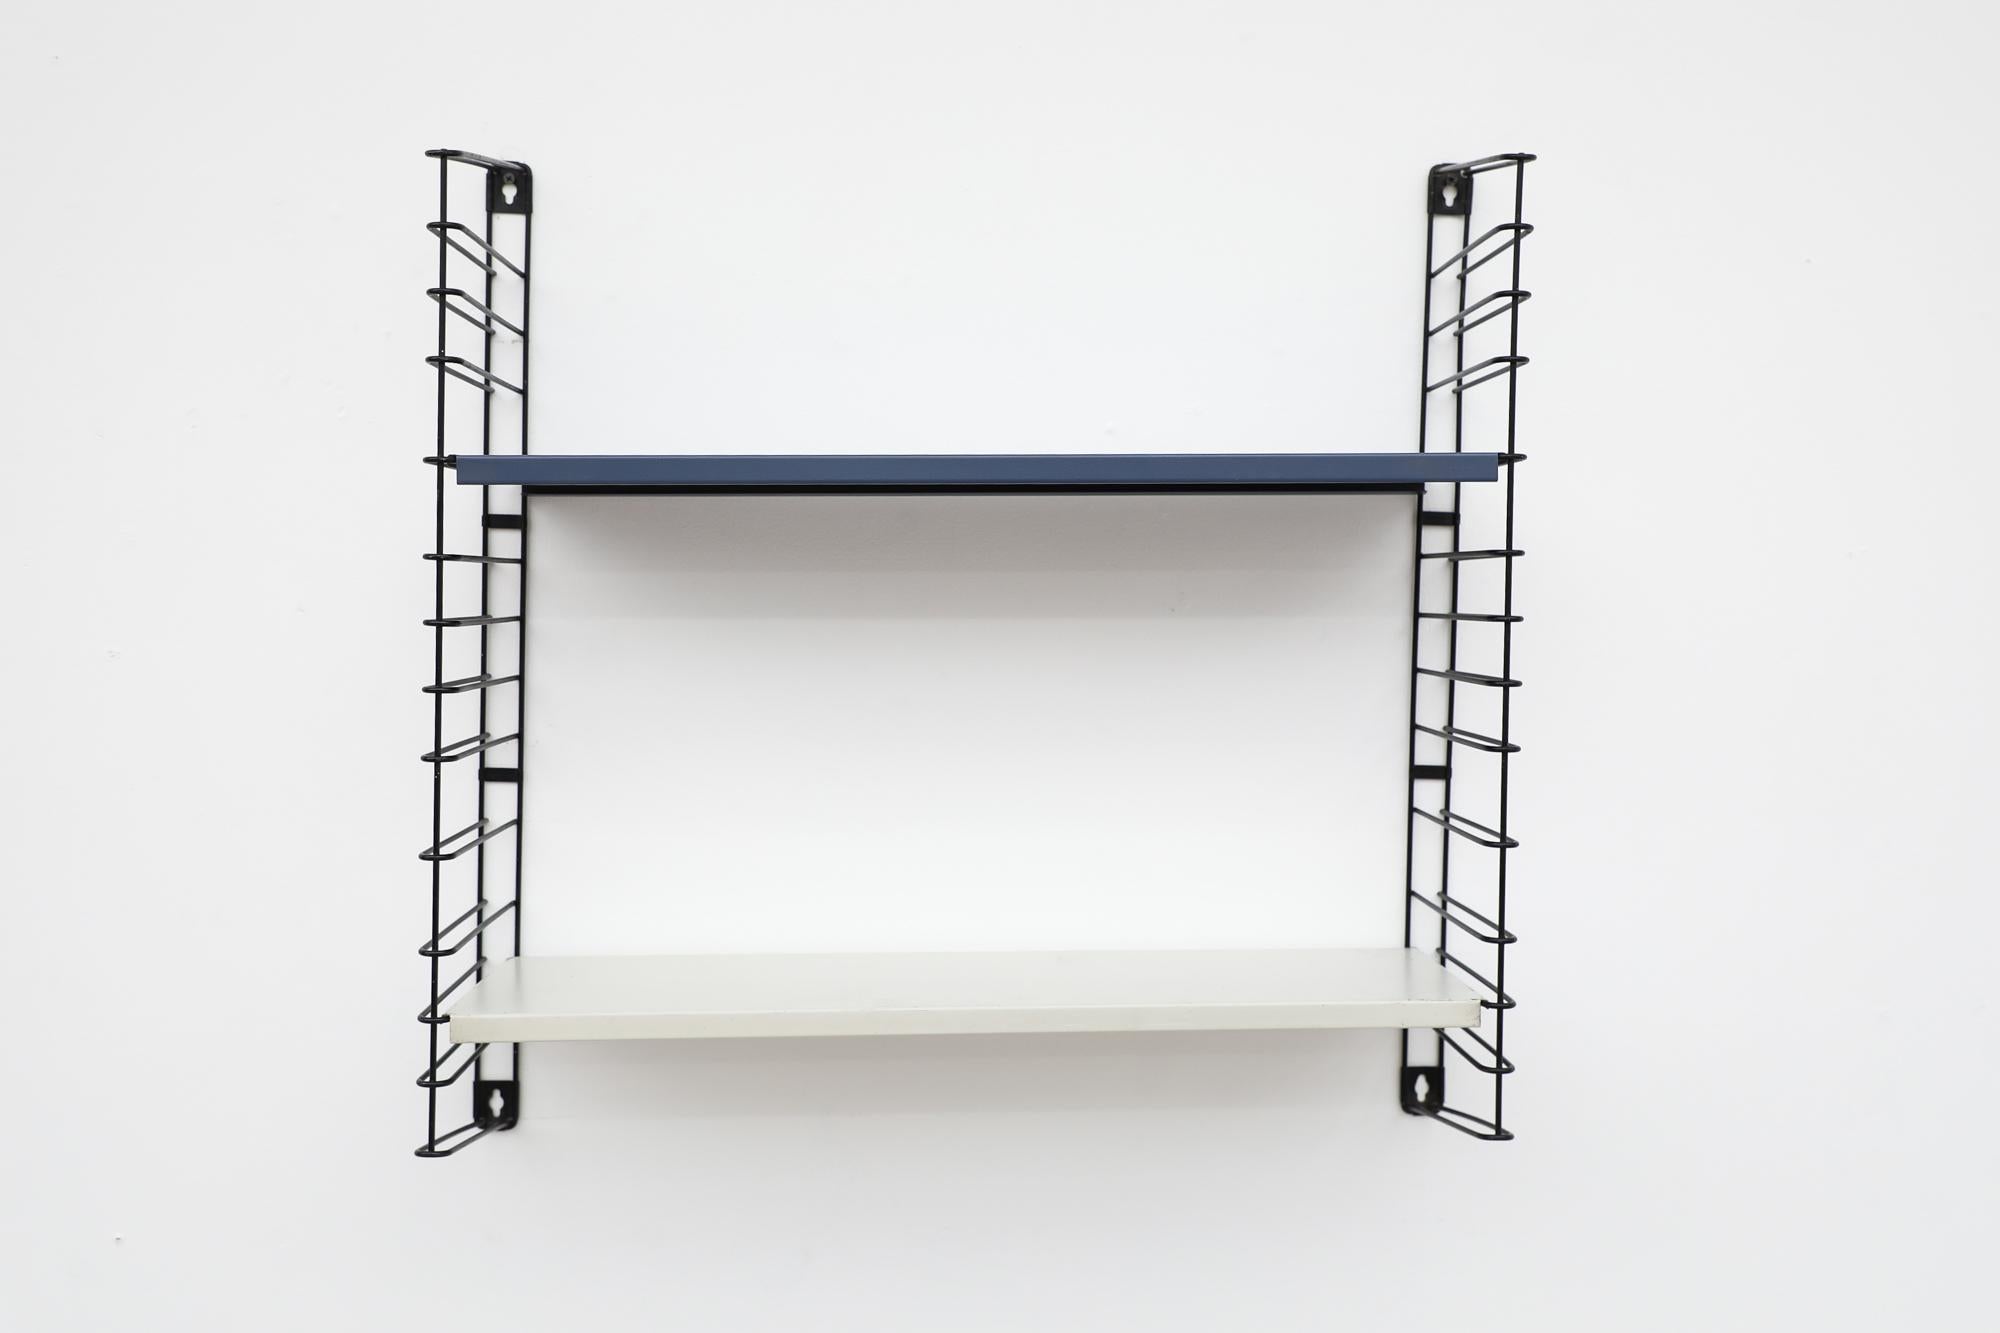 Mid-Century Tomado Industrial shelving with delft blue and white shelves on black enameled metal wire risers. Designed by Jan Van Der Togt. Both shelves rest on the wire risers and can be arranged to different heights. The Blue shelf has been newly